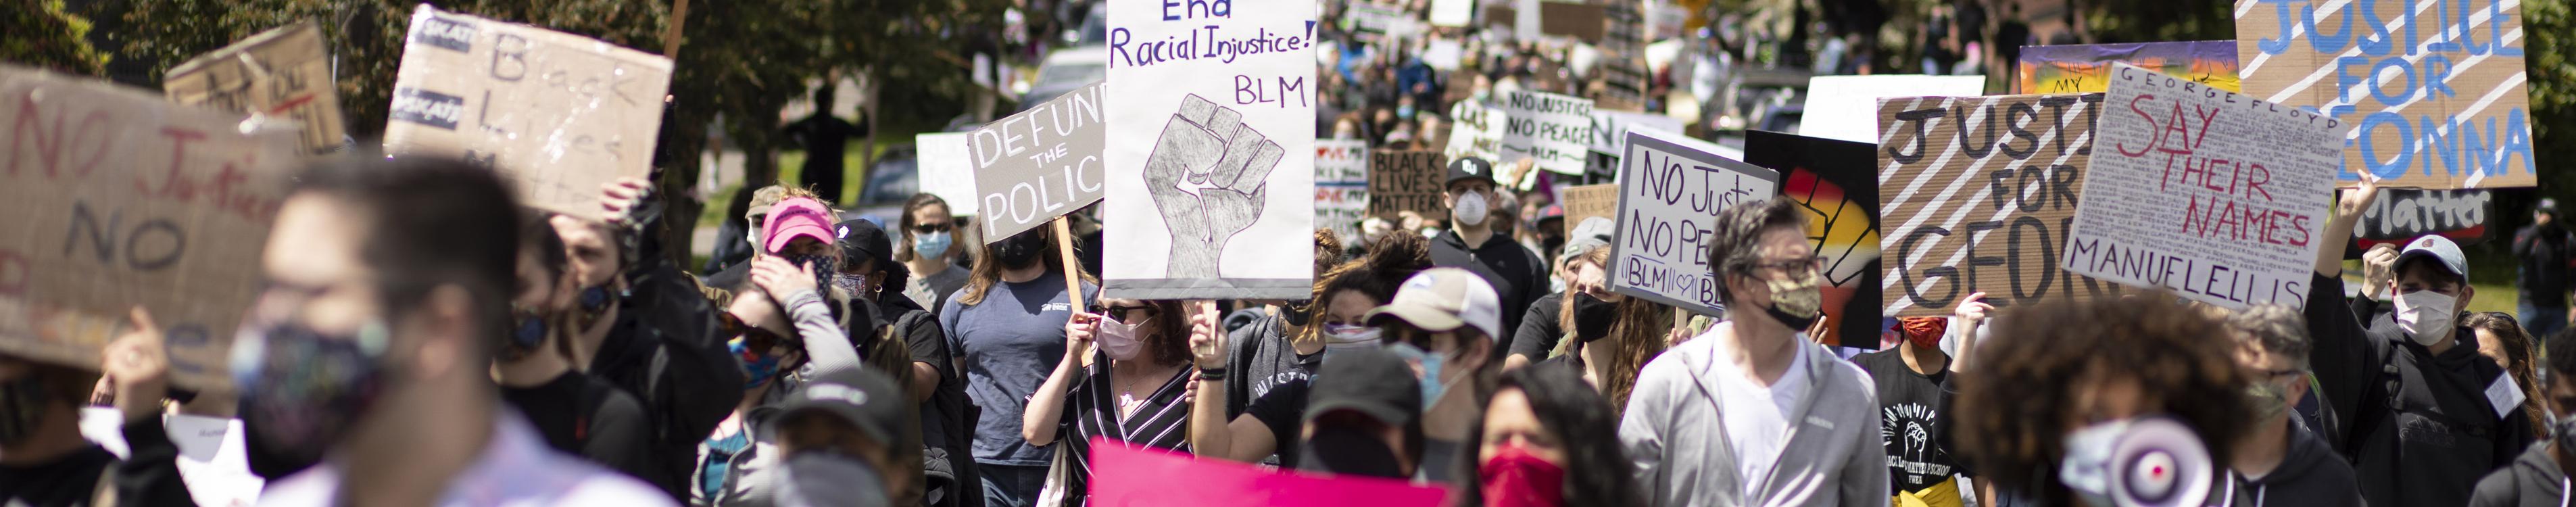 A group of protesters marching with signs